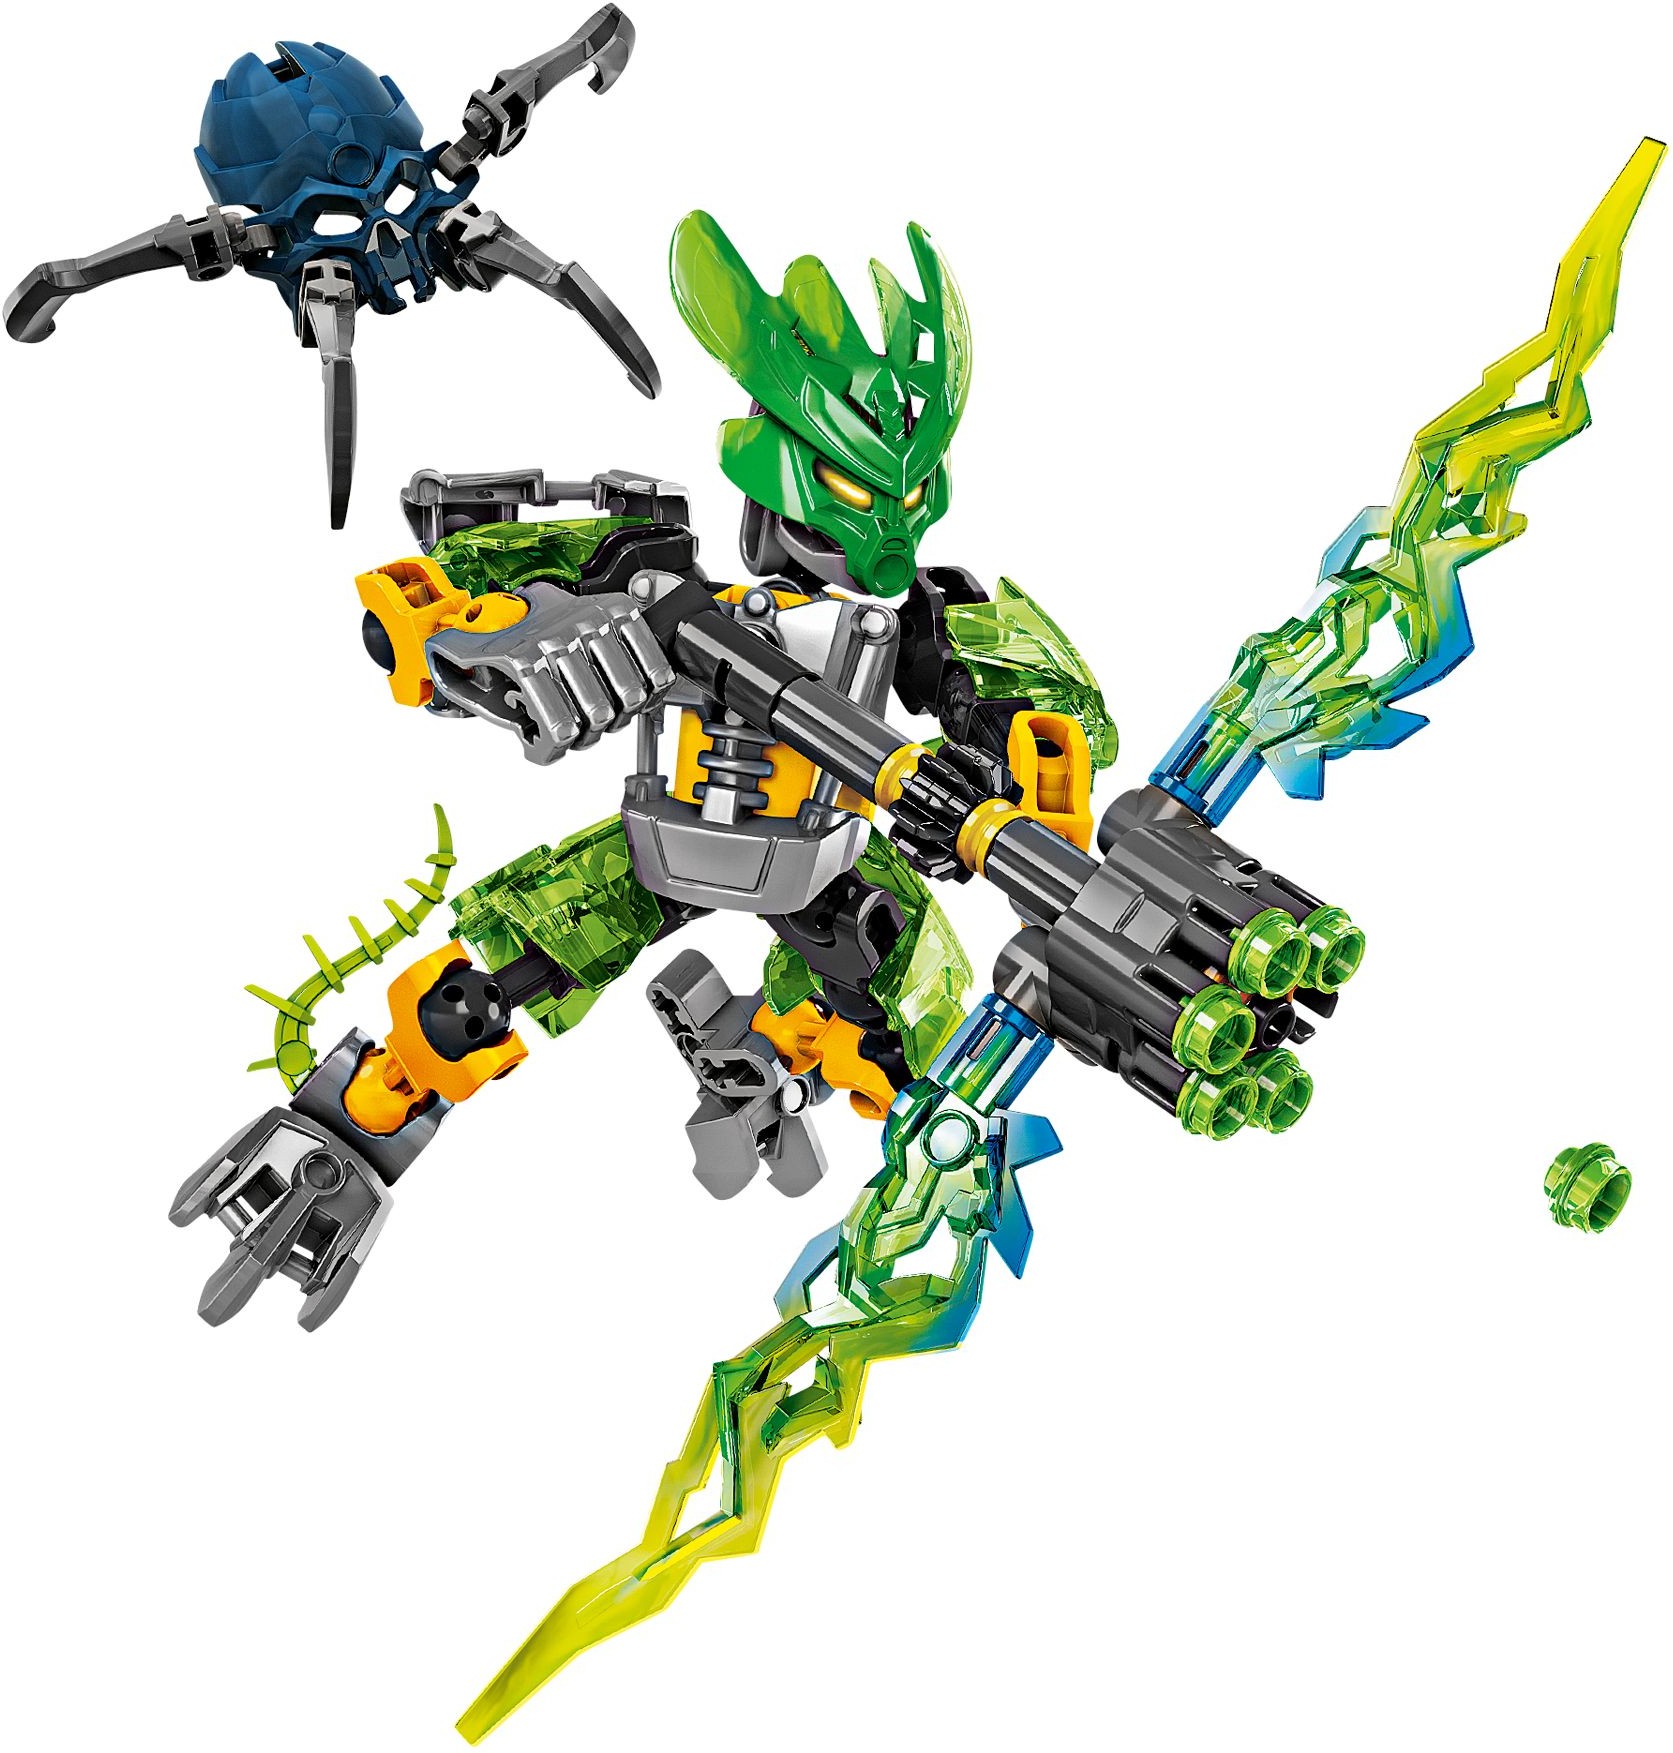 Bionicle | 2015 Brickset: LEGO guide and